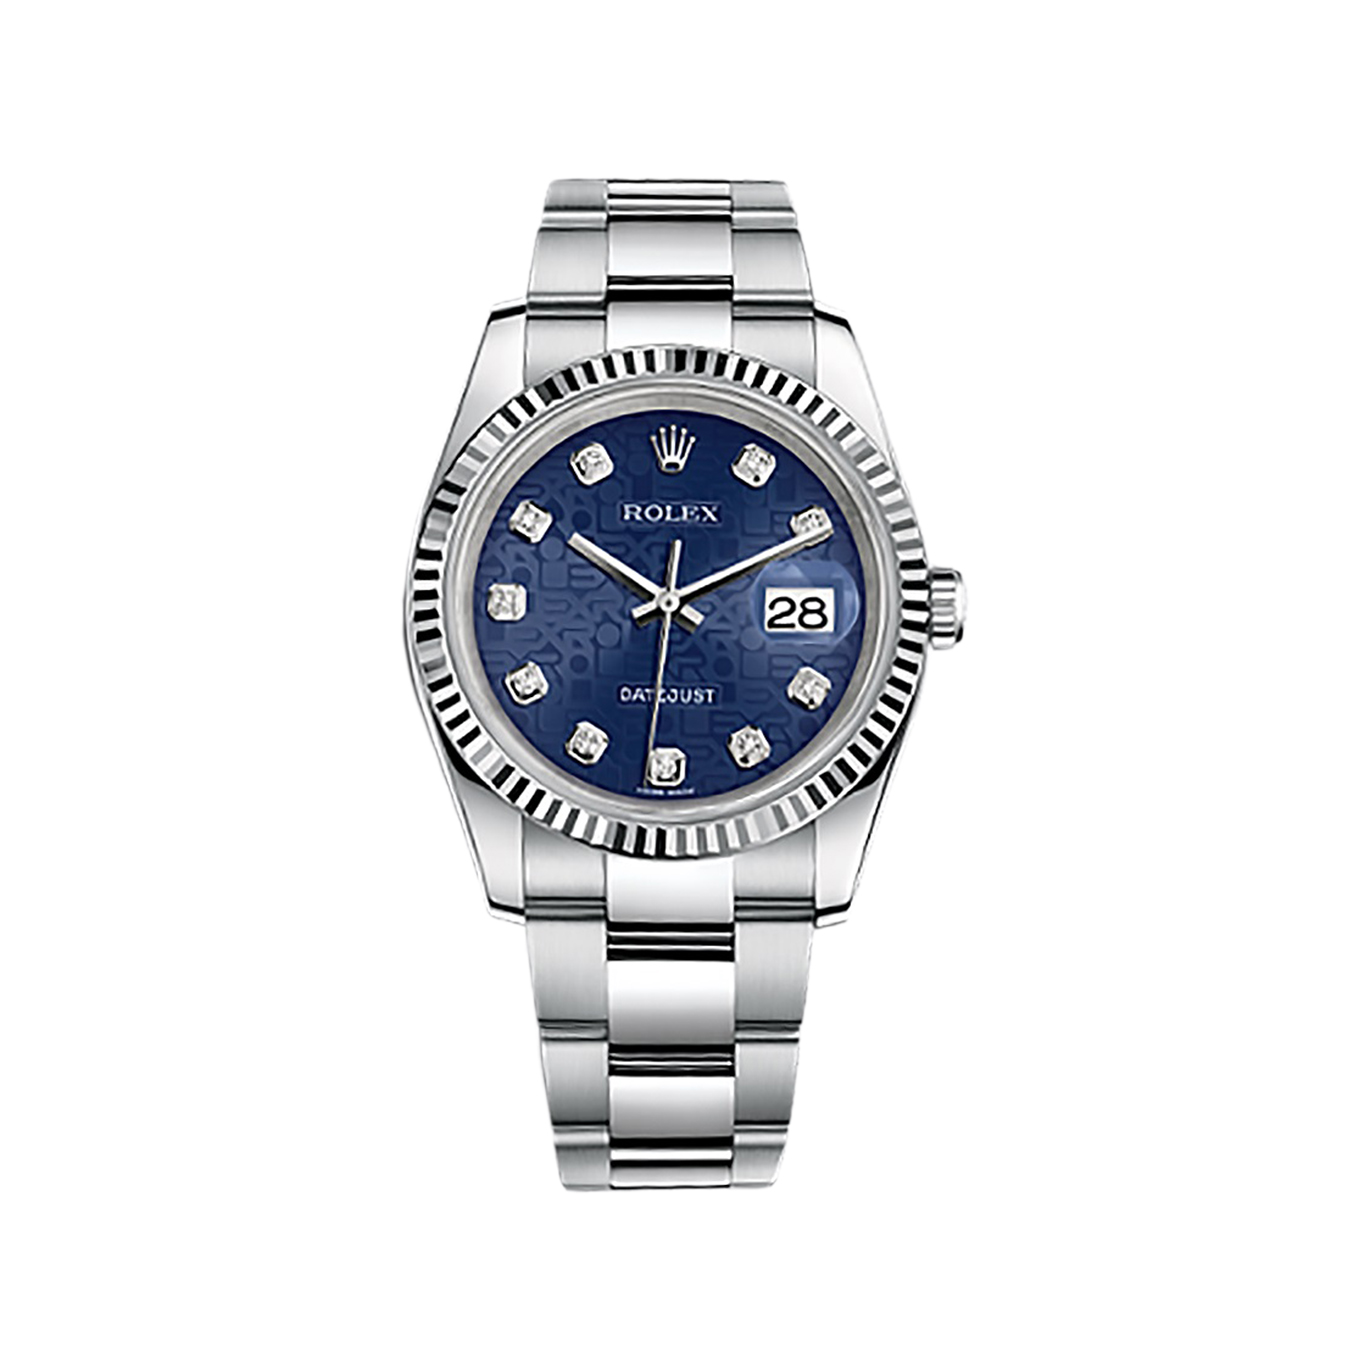 Datejust 36 116234 White Gold & Stainless Steel Watch (Blue Jubilee Design Set with Diamonds)